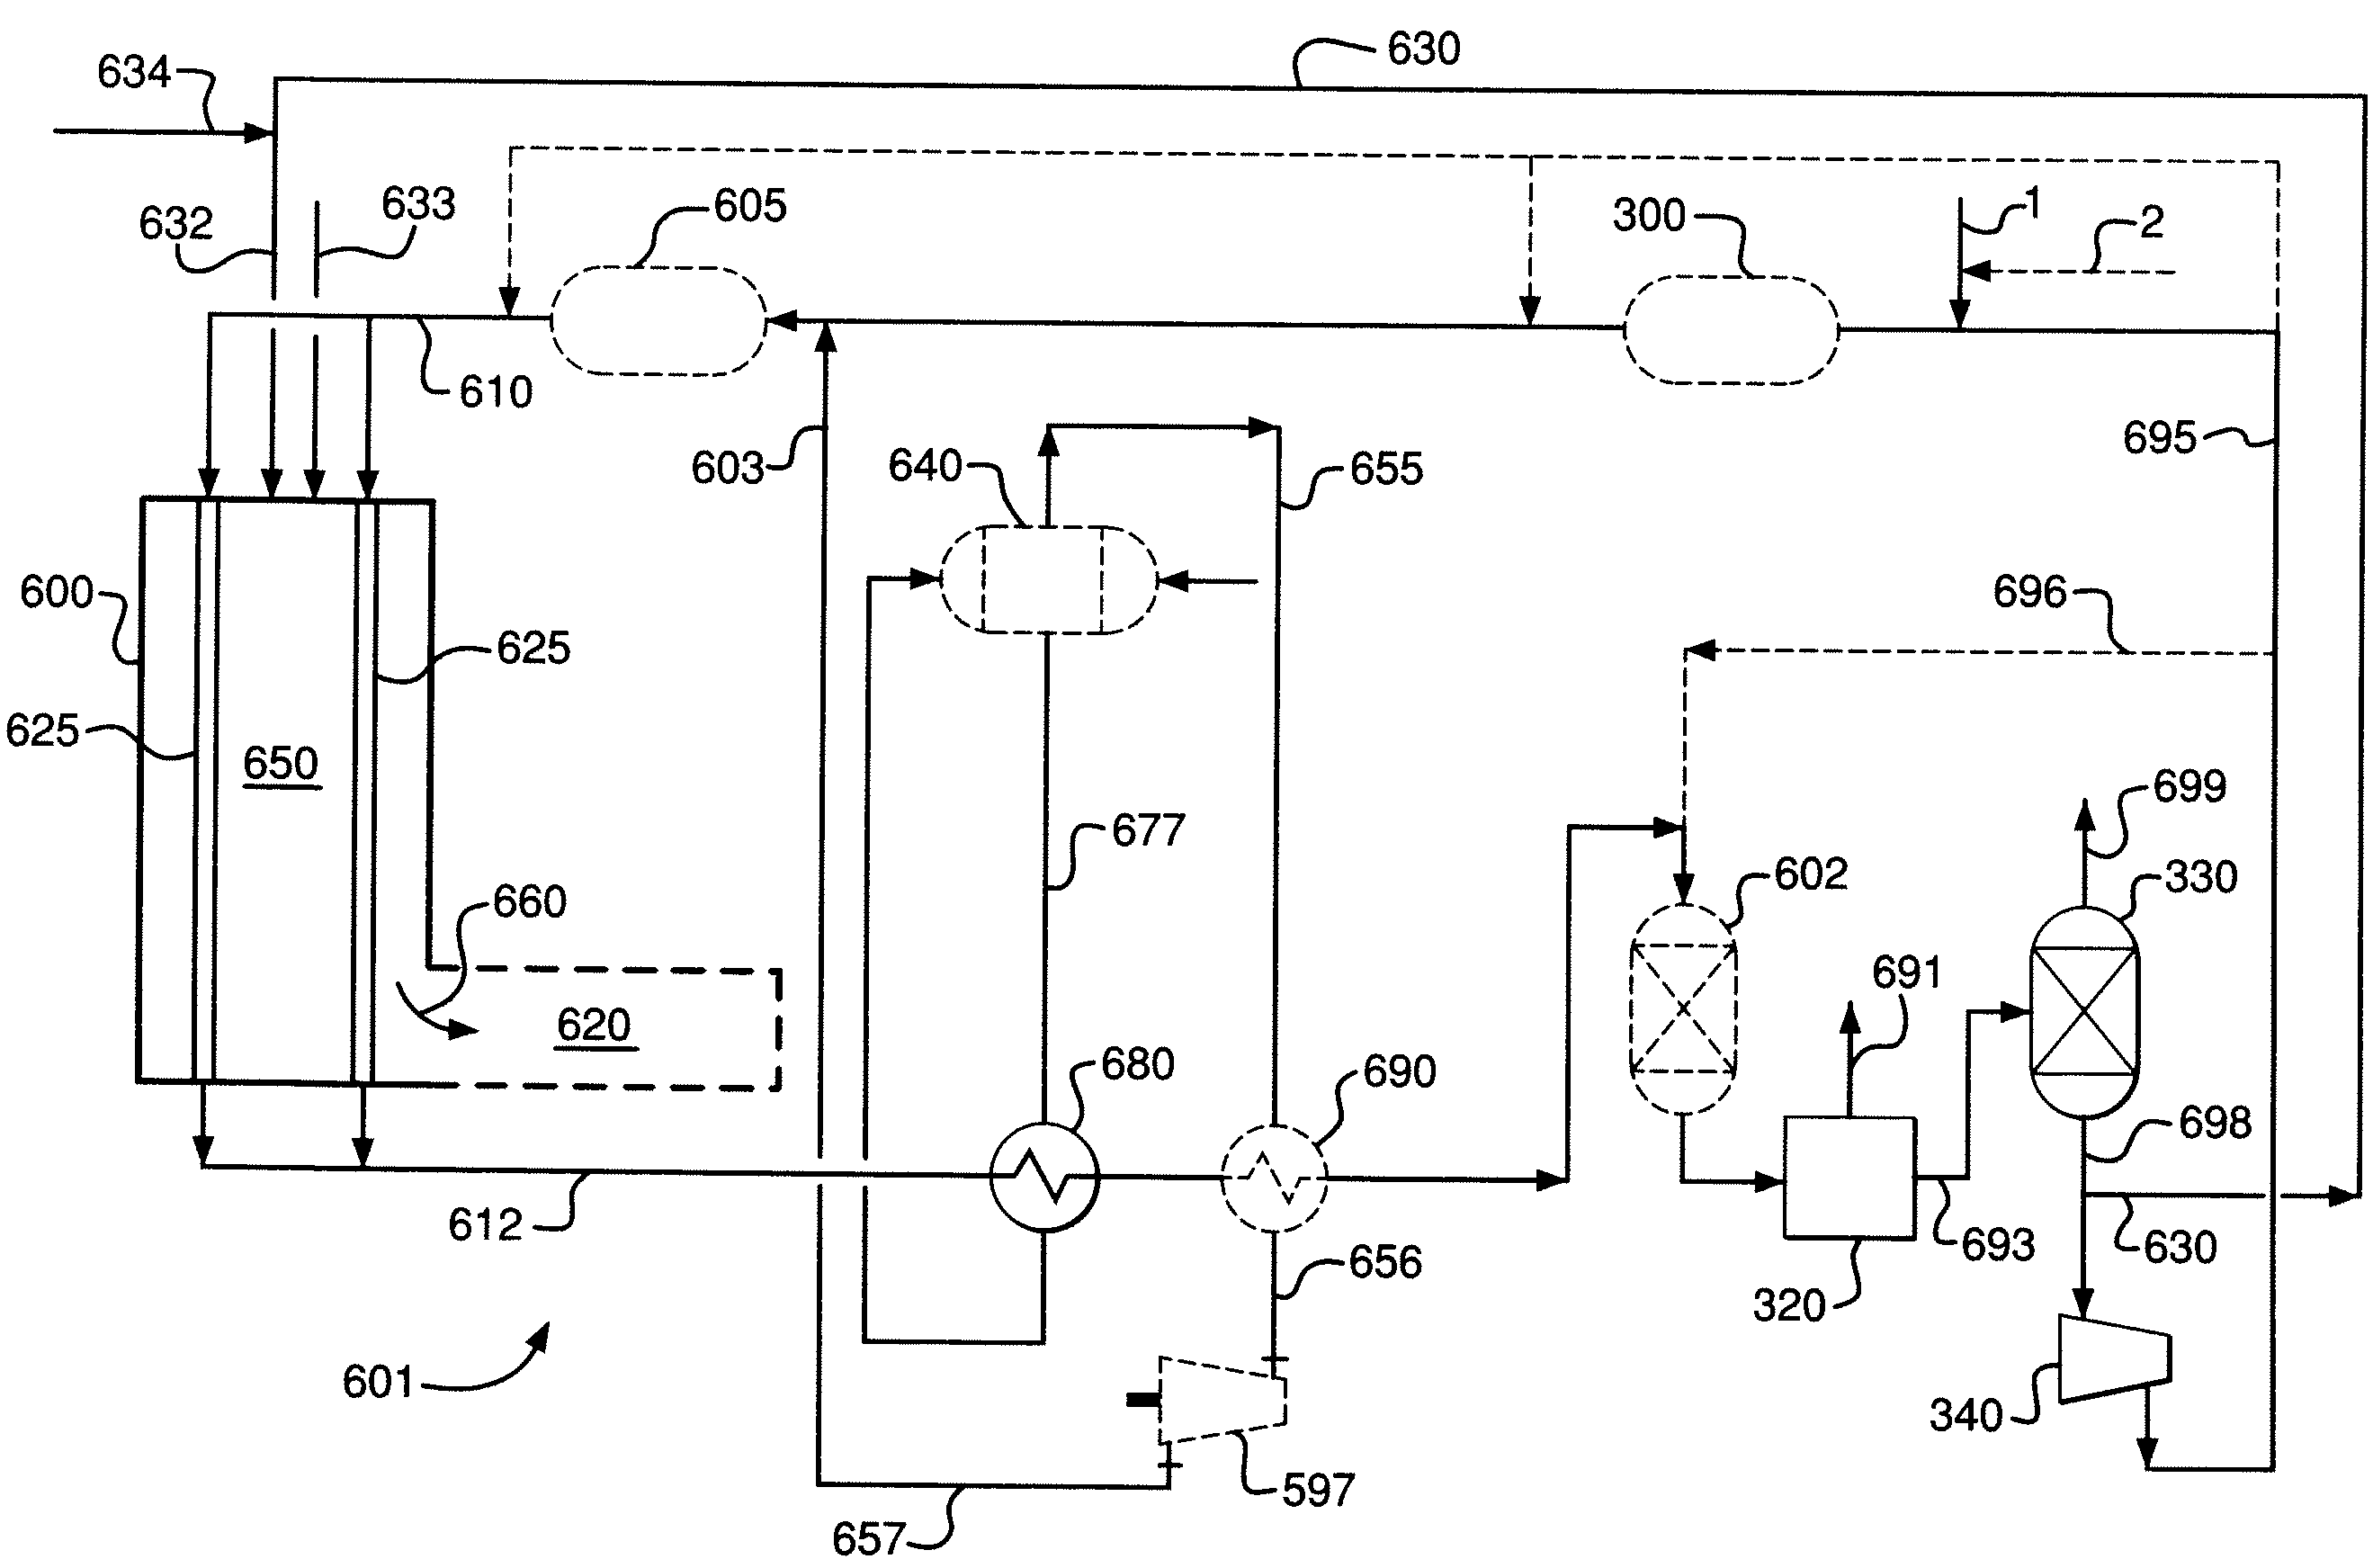 Steam-Hydrocarbon Reforming Method with Limited Steam Export